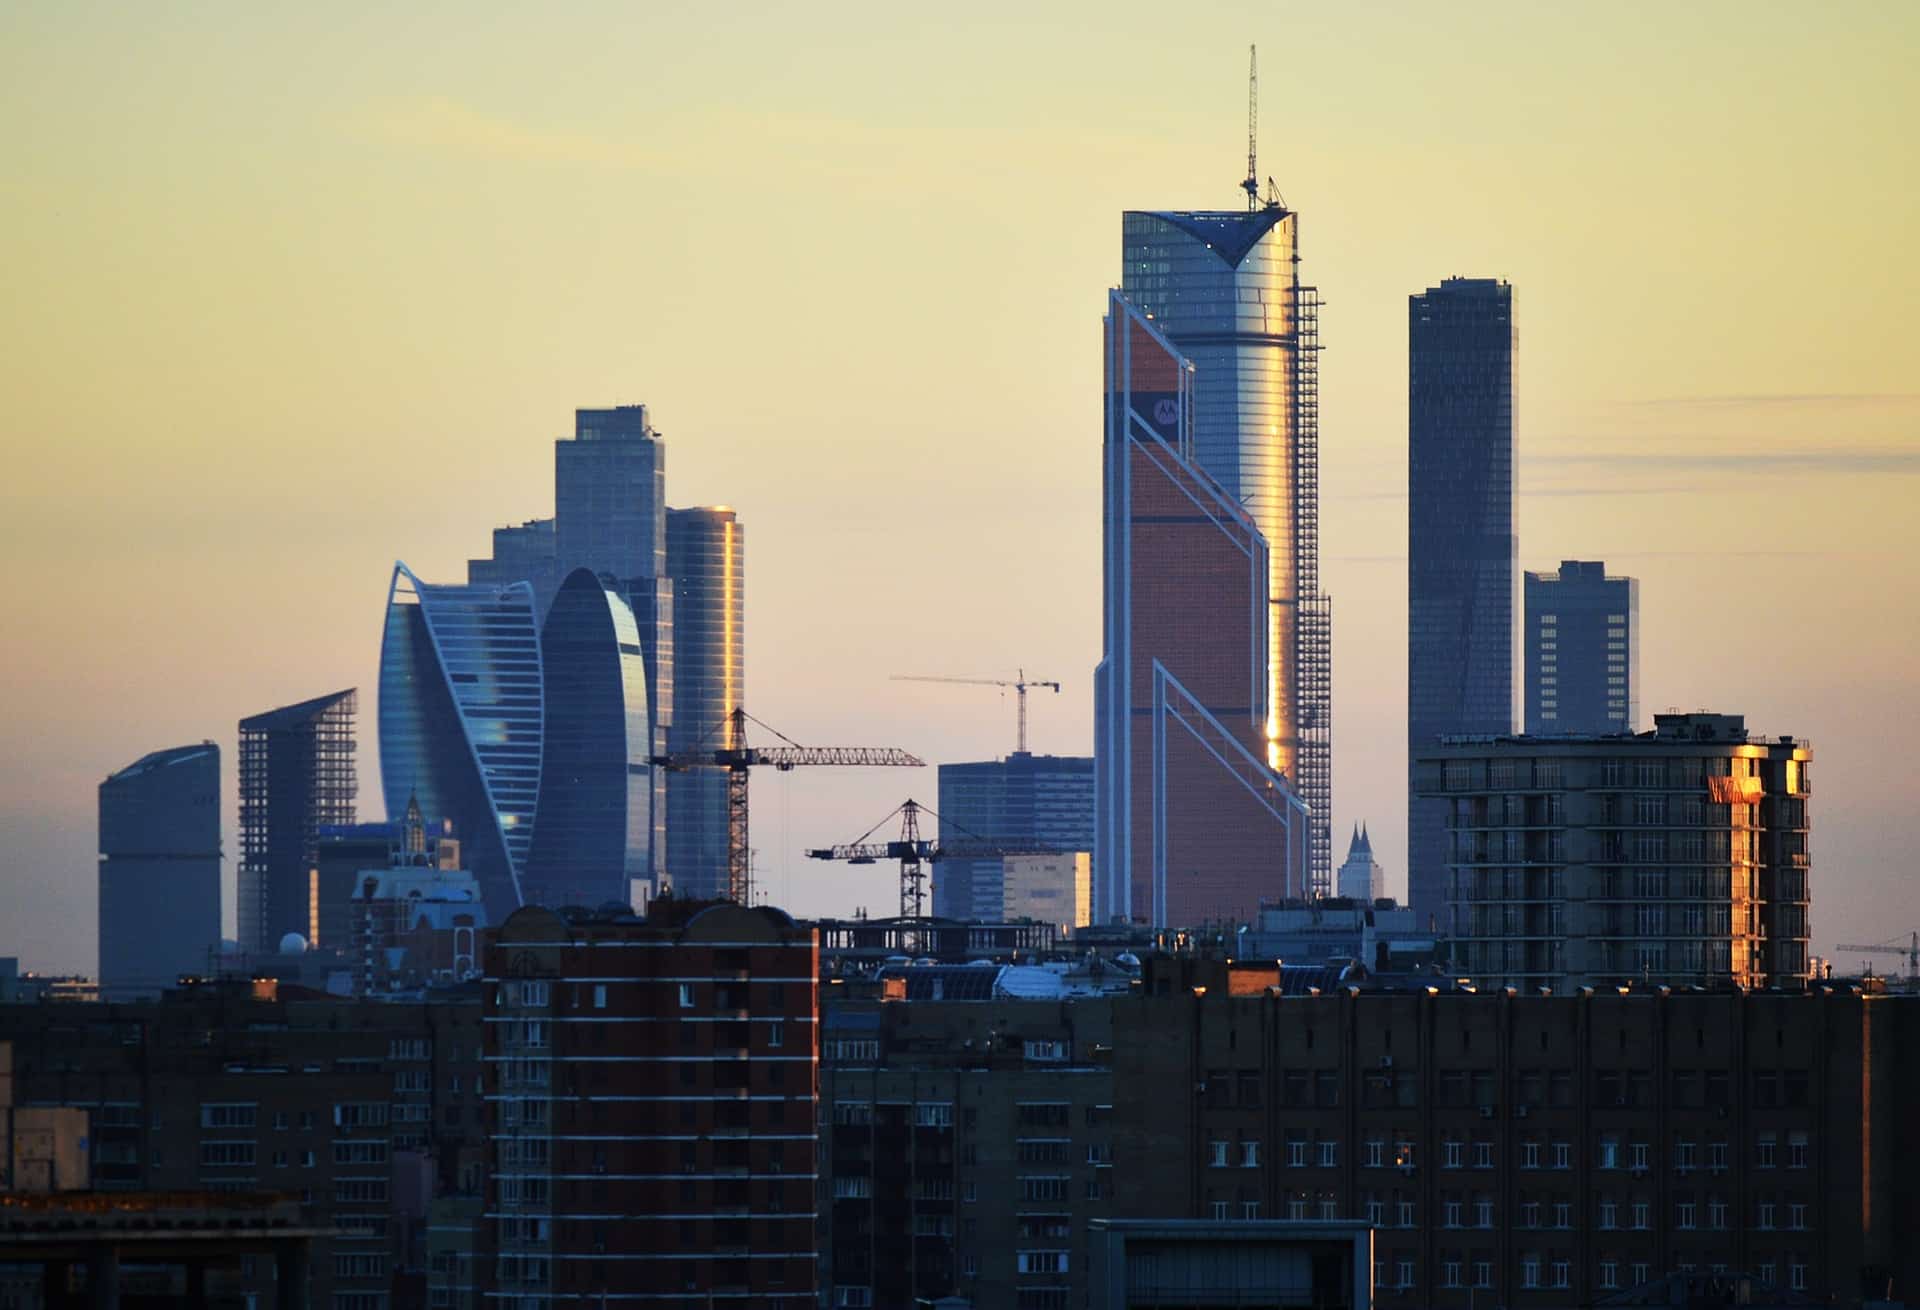 Moscow business district under construction